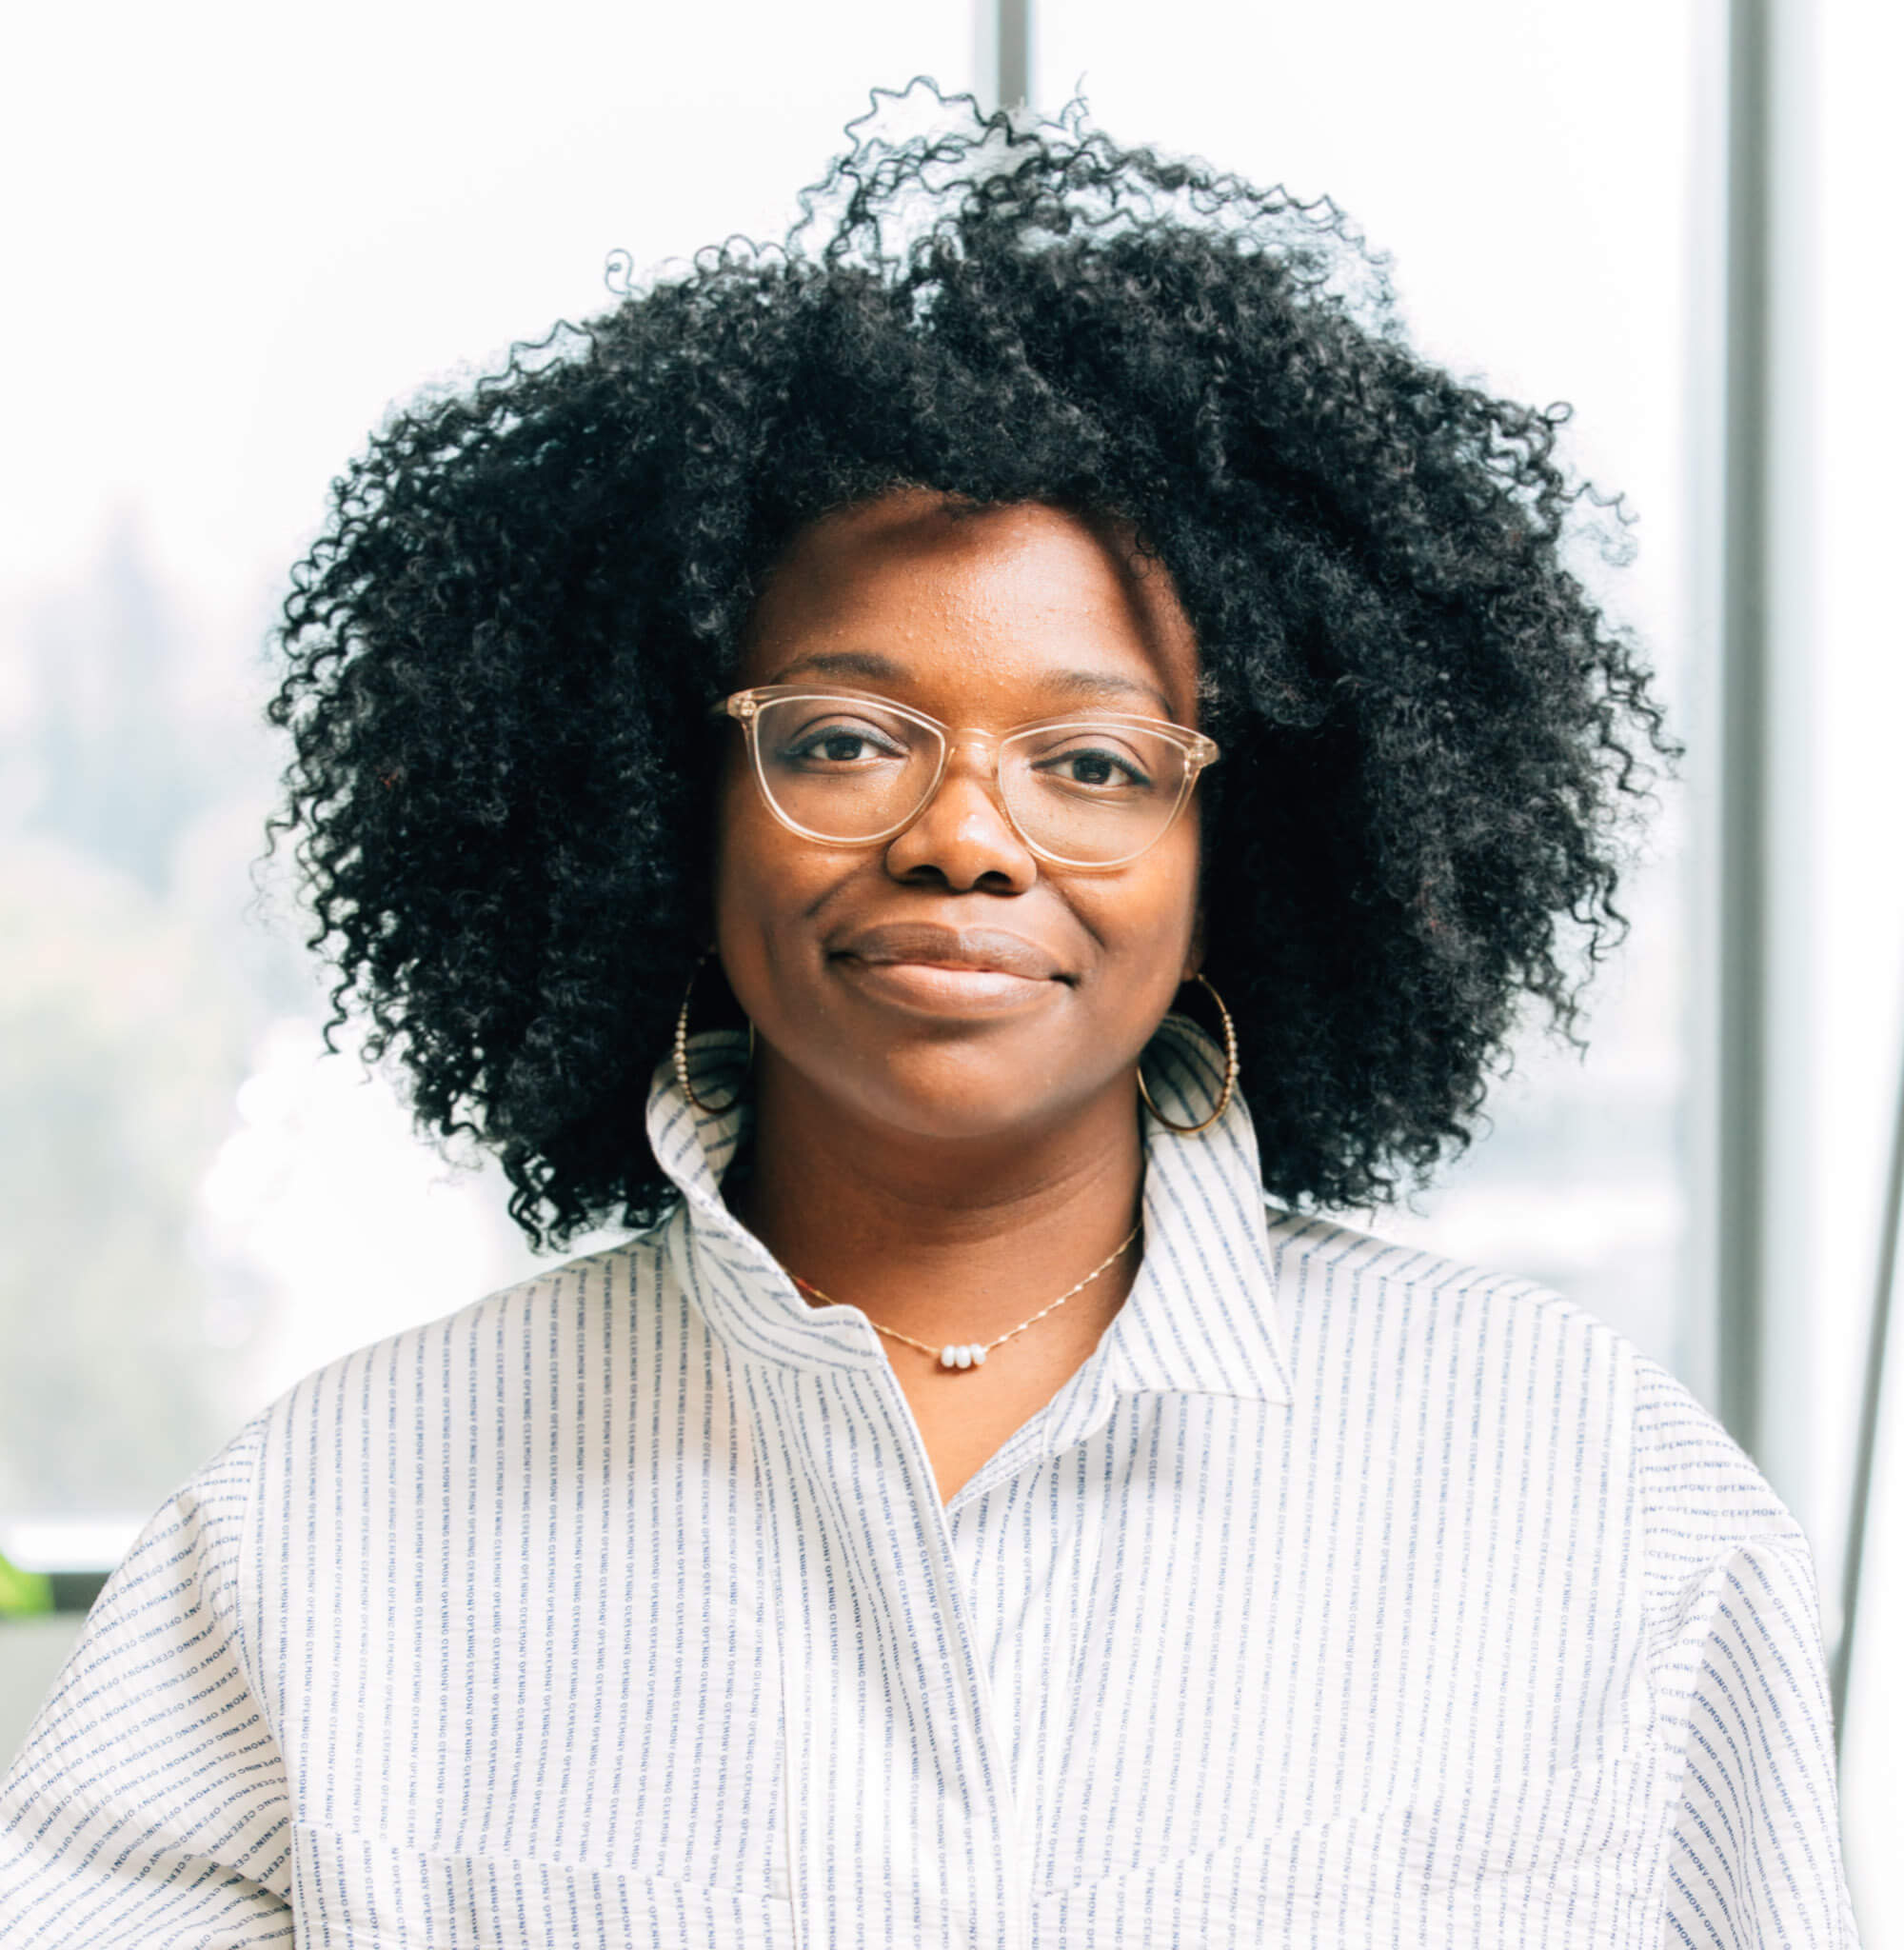 A portrait of Osi Imeokparia, Vice President, Product and Head of Justice & Opportunity Technology at the Chan Zuckerberg Initiative